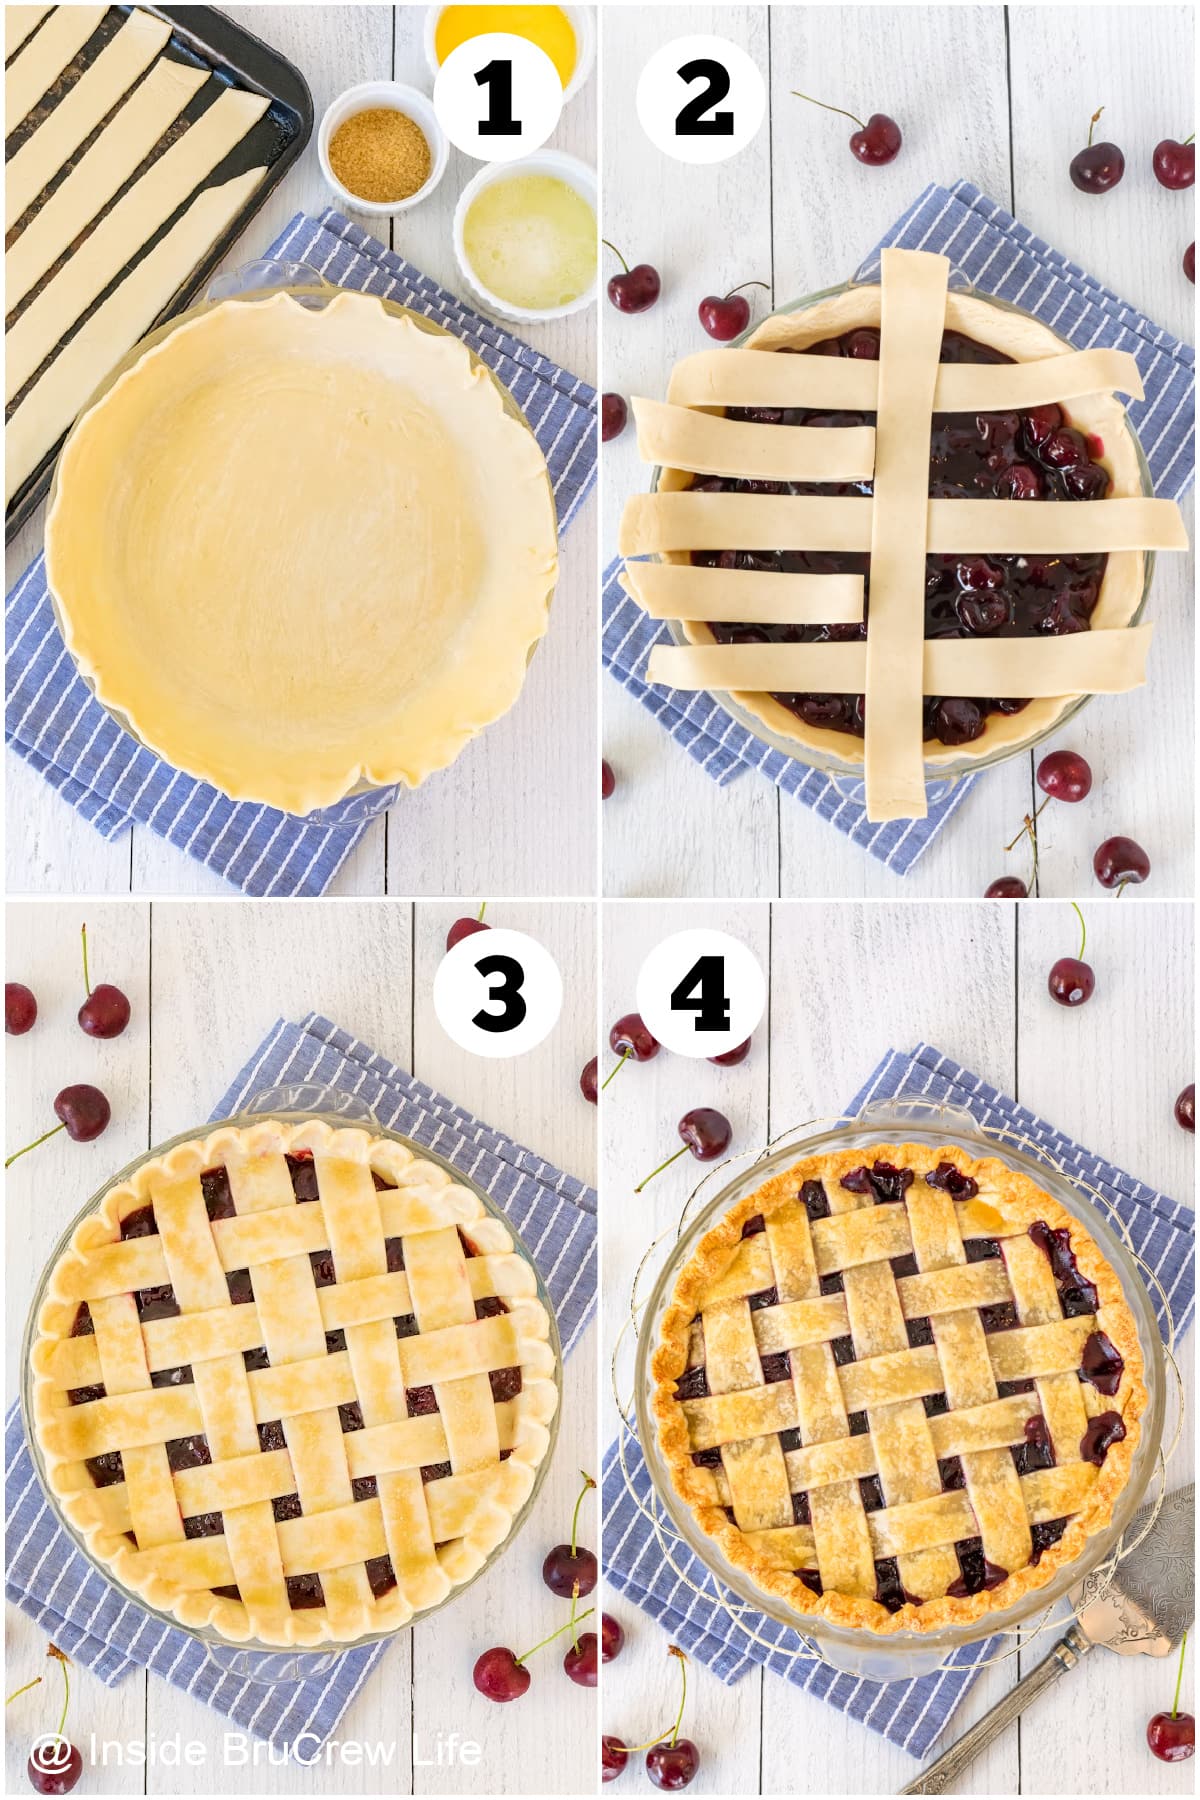 Four pictures collaged together showing how to assemble a cherry pie with lattice crust.